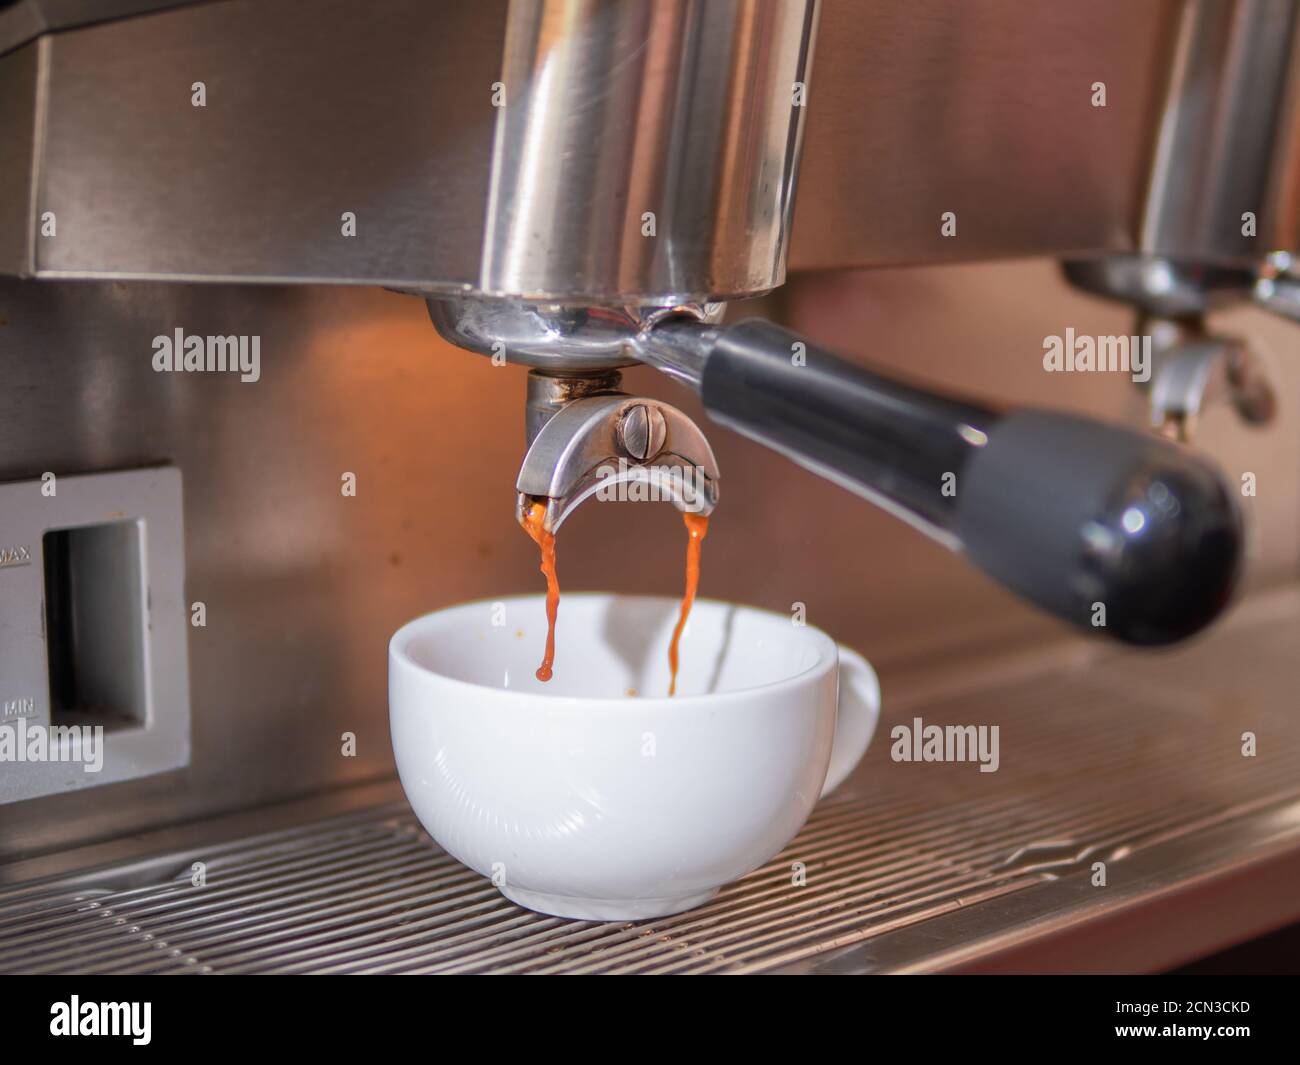 Fresh coffee pouring down from the portafilter of espresso machine into the white ceramic cup. Making hot coffee with the espresso machine. Stock Photo